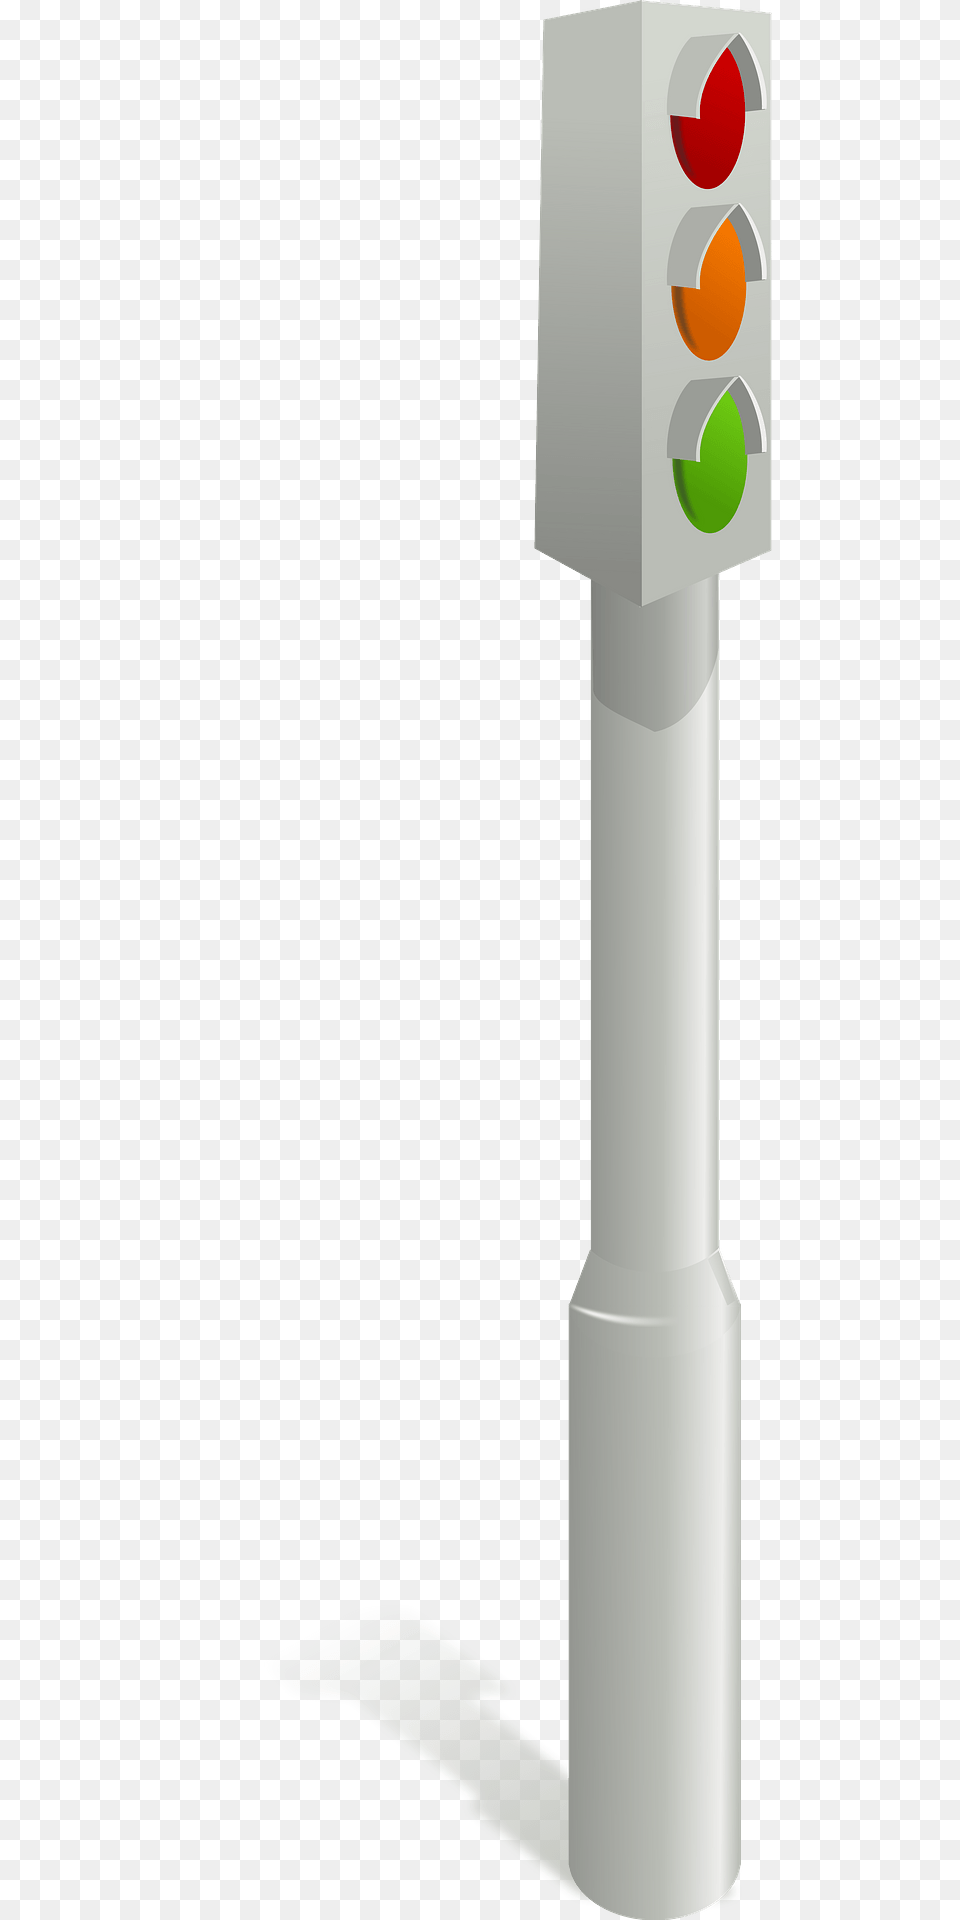 Traffic Light On A Post Clipart, Traffic Light Free Png